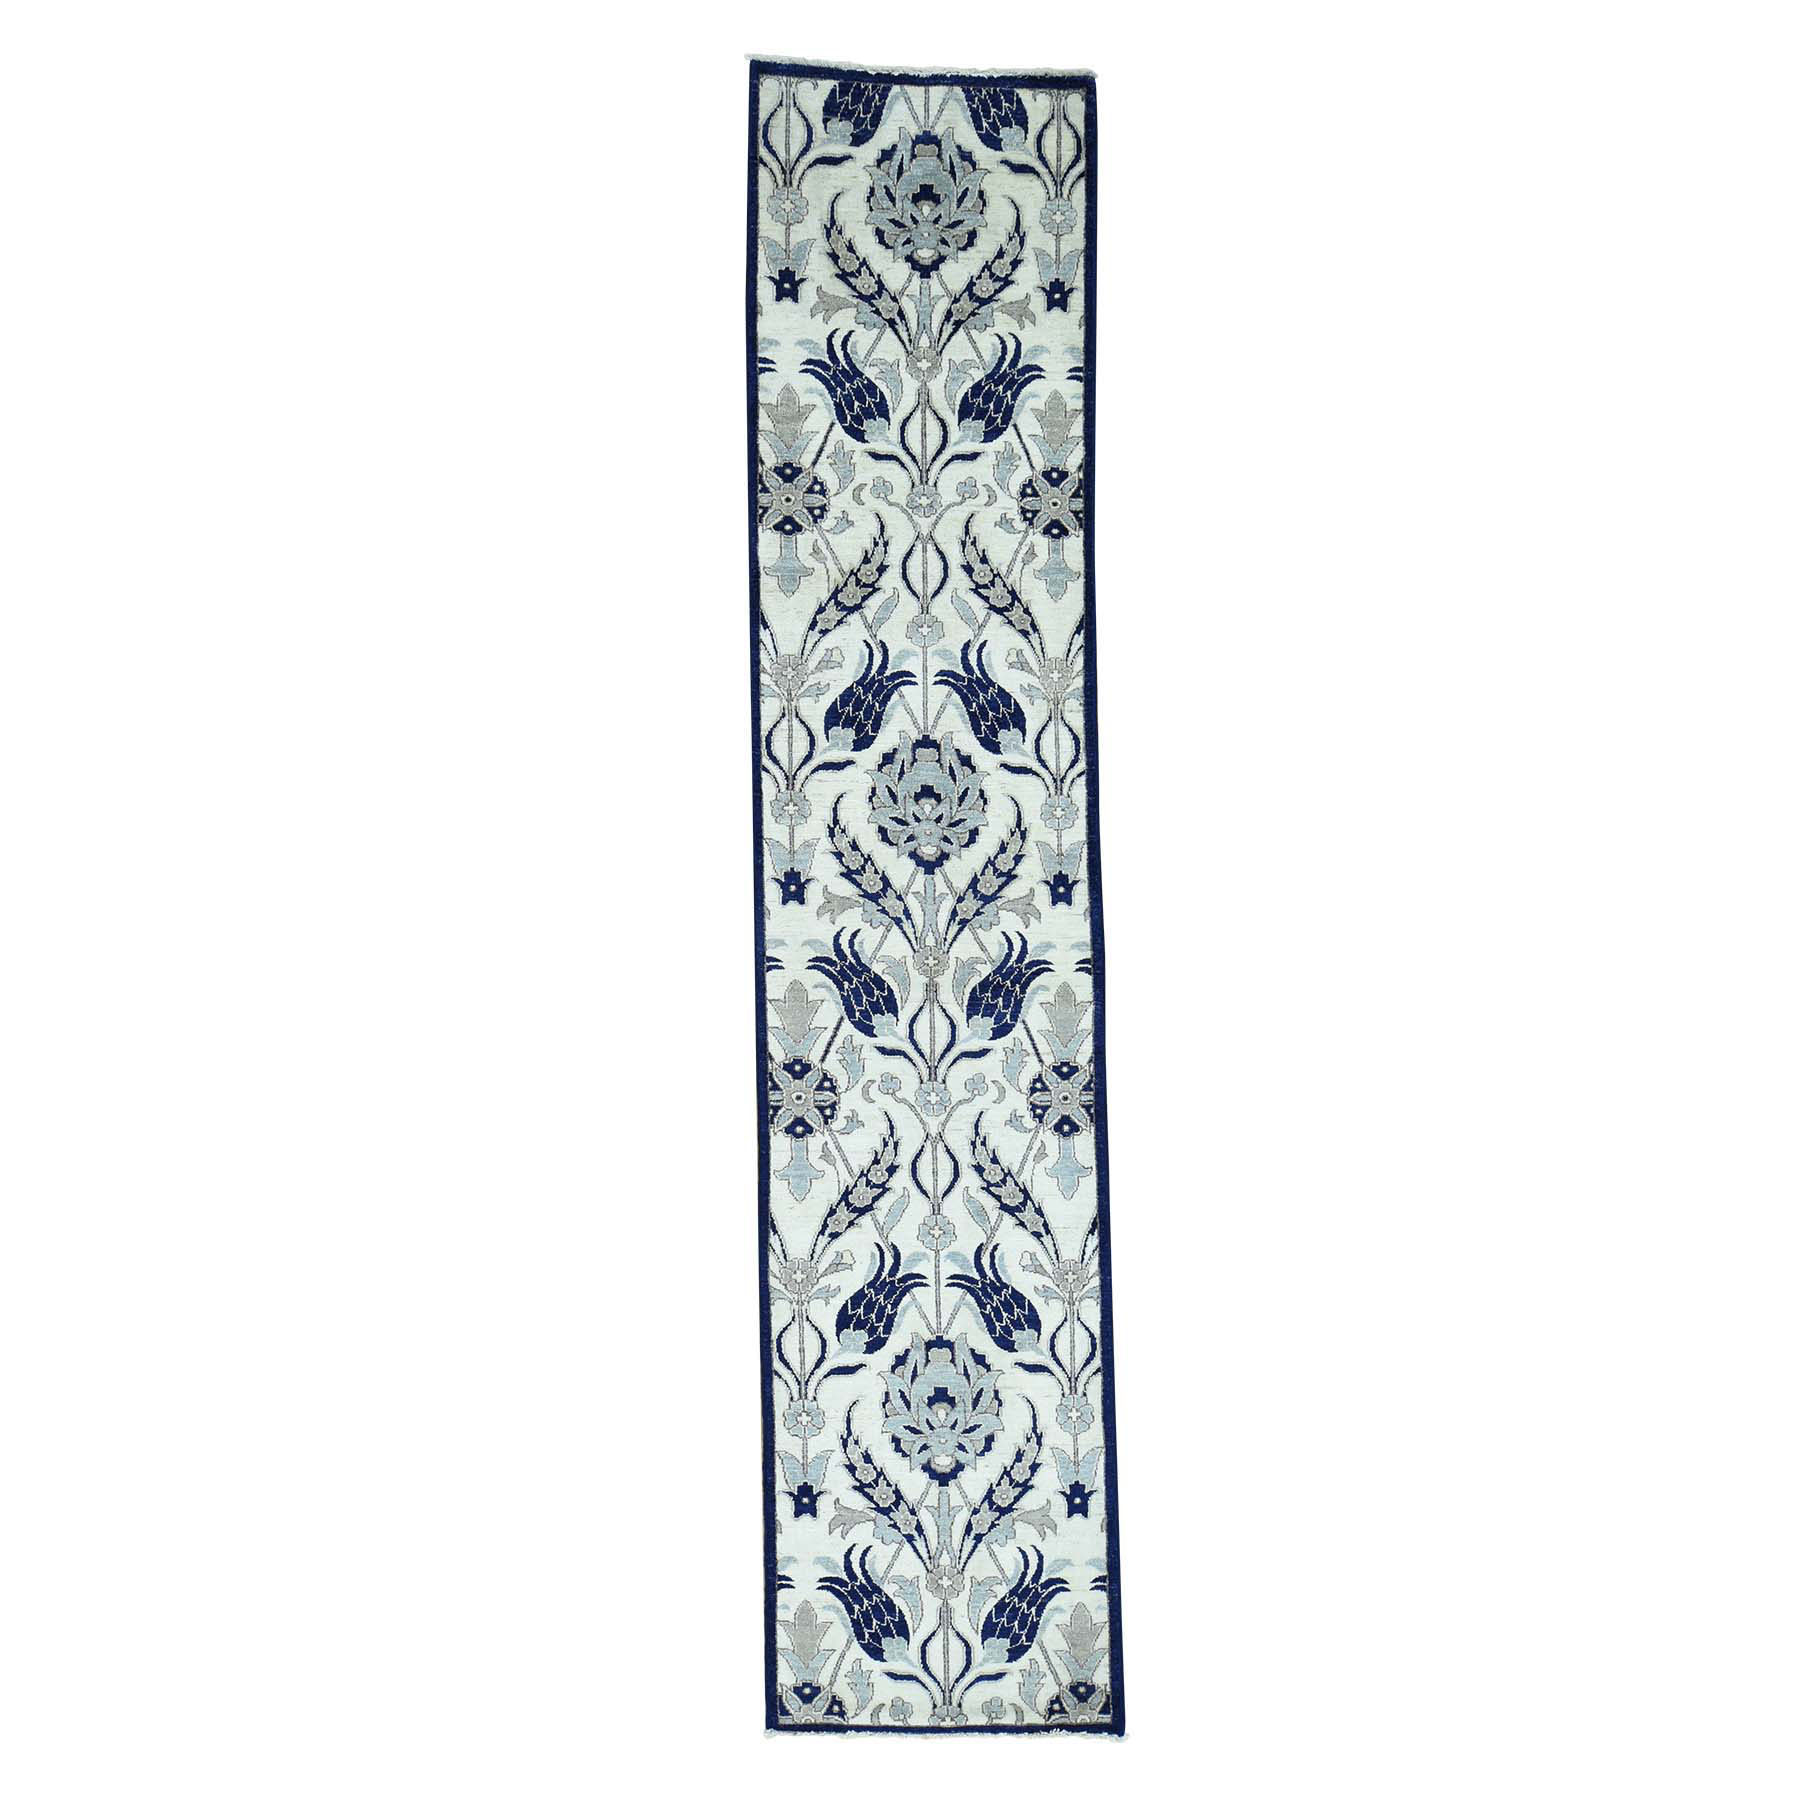 2'7"x12'1" On Clearance Hand Woven Arts And Crafts William Morris Design Runner Rug 